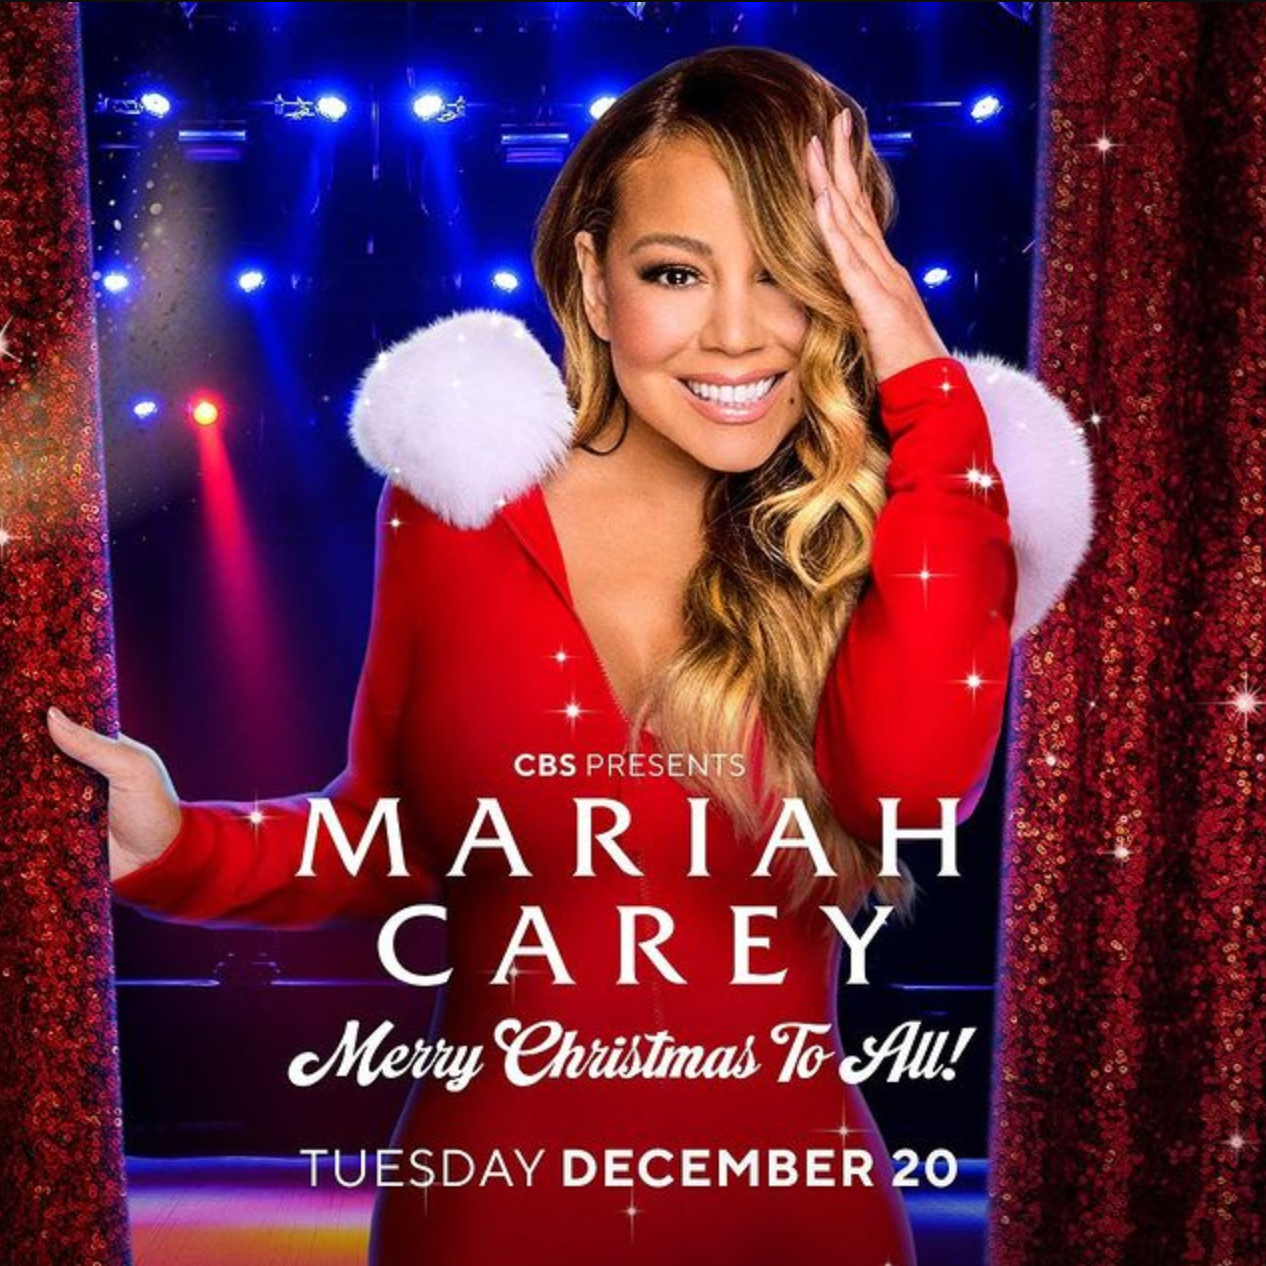 How To Watch Mariah Careys 2022 Christmas Special Mariah Carey Merry Christmas To All